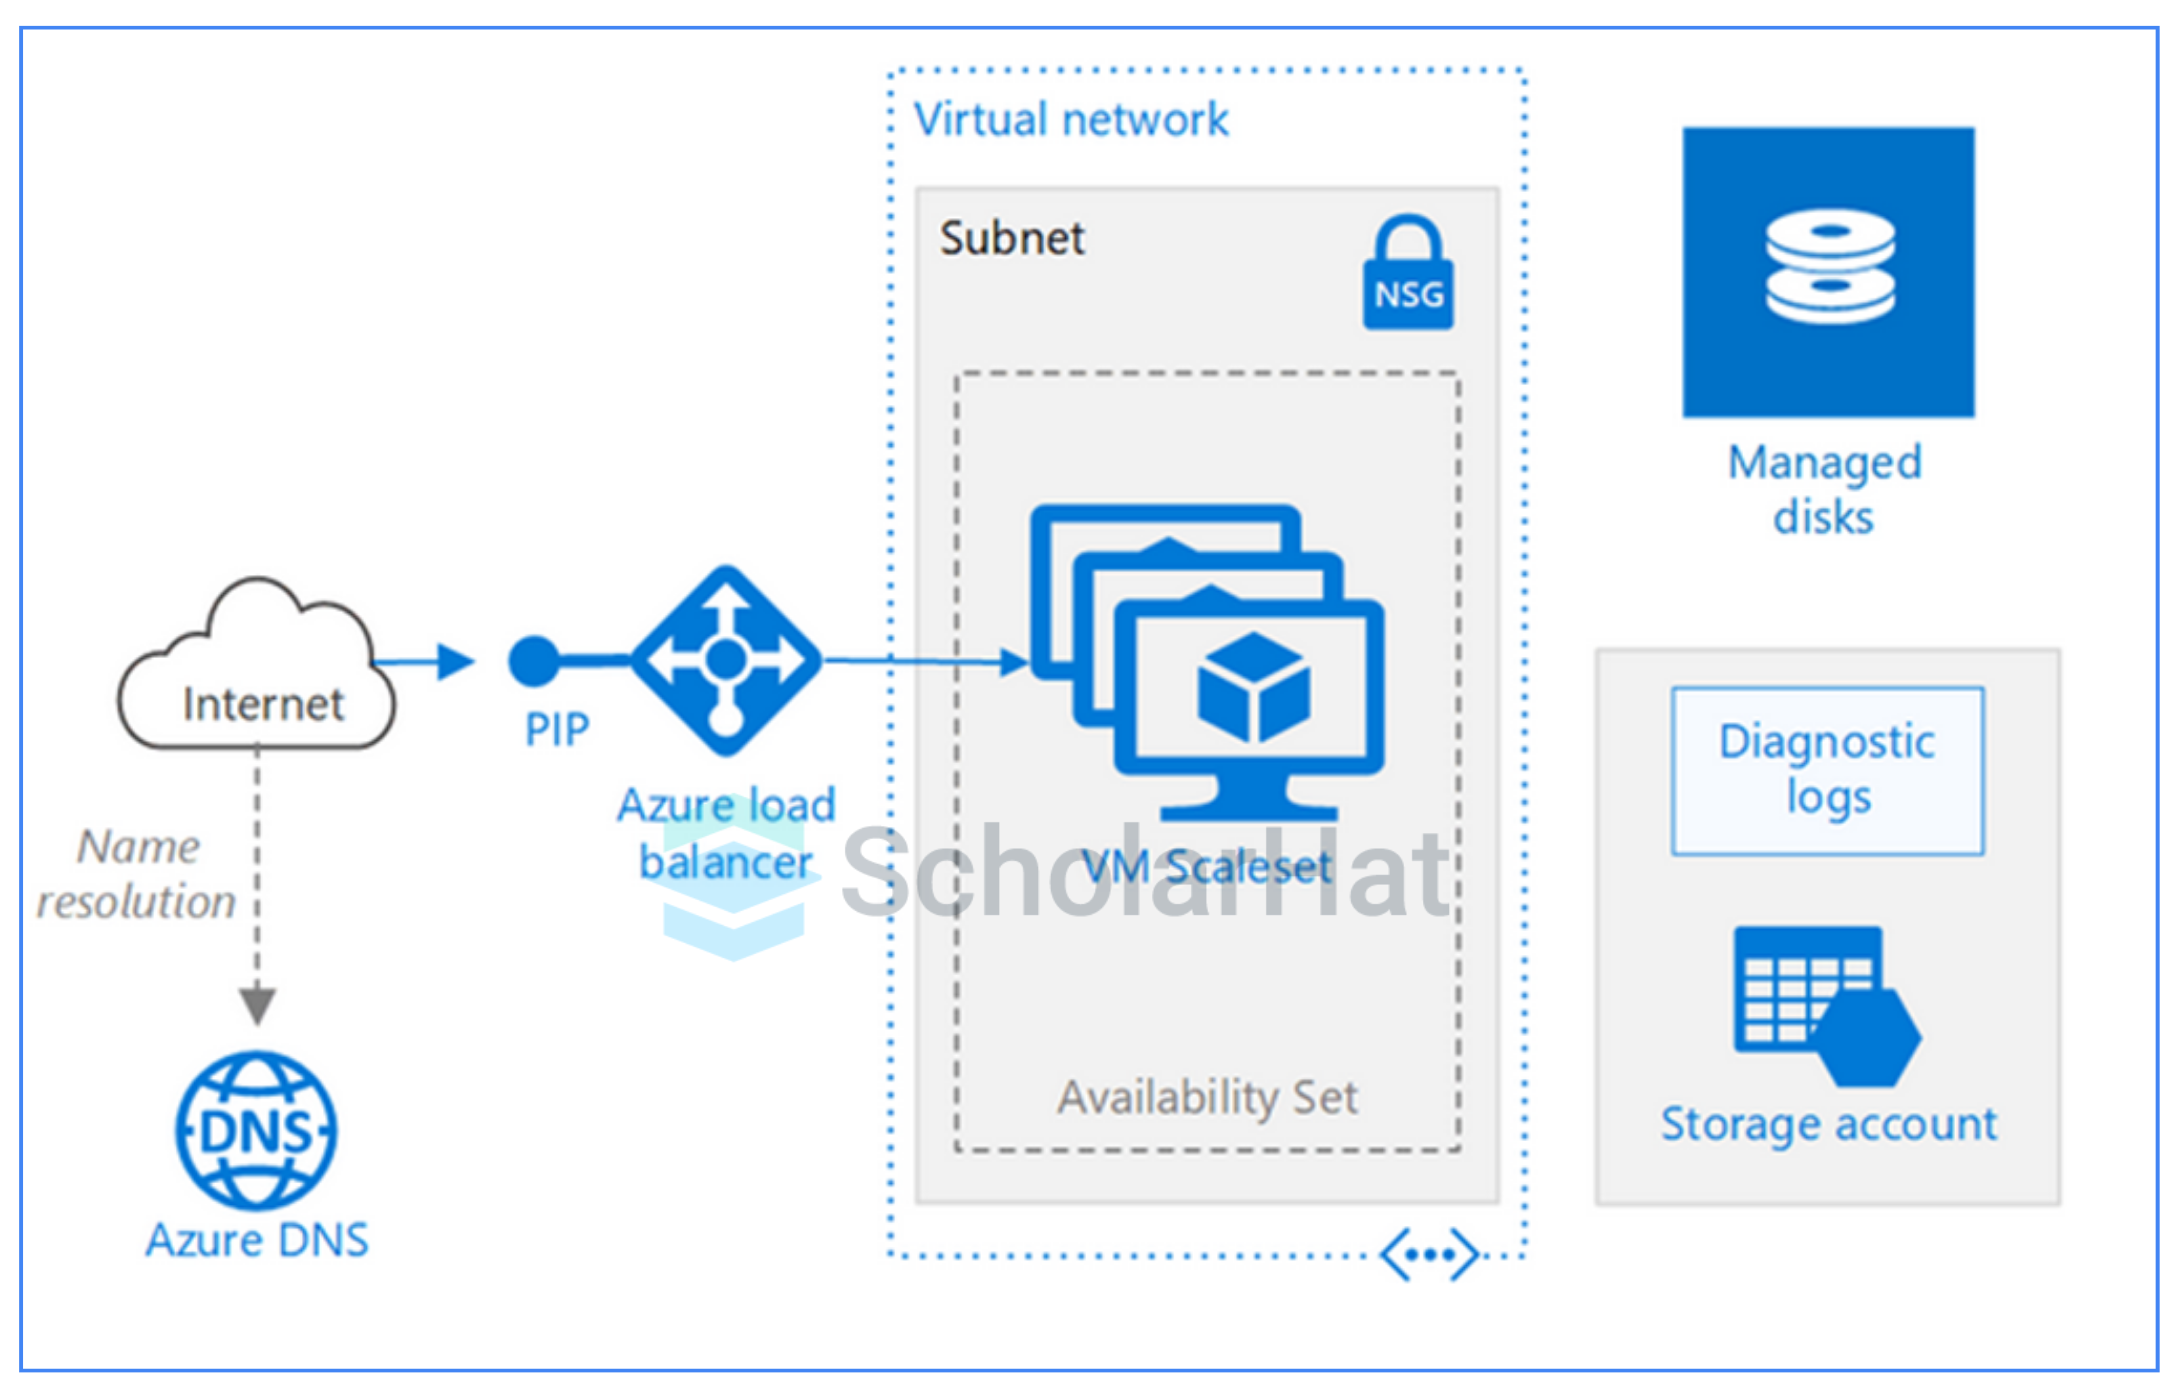 What are Availability Sets in Azure?